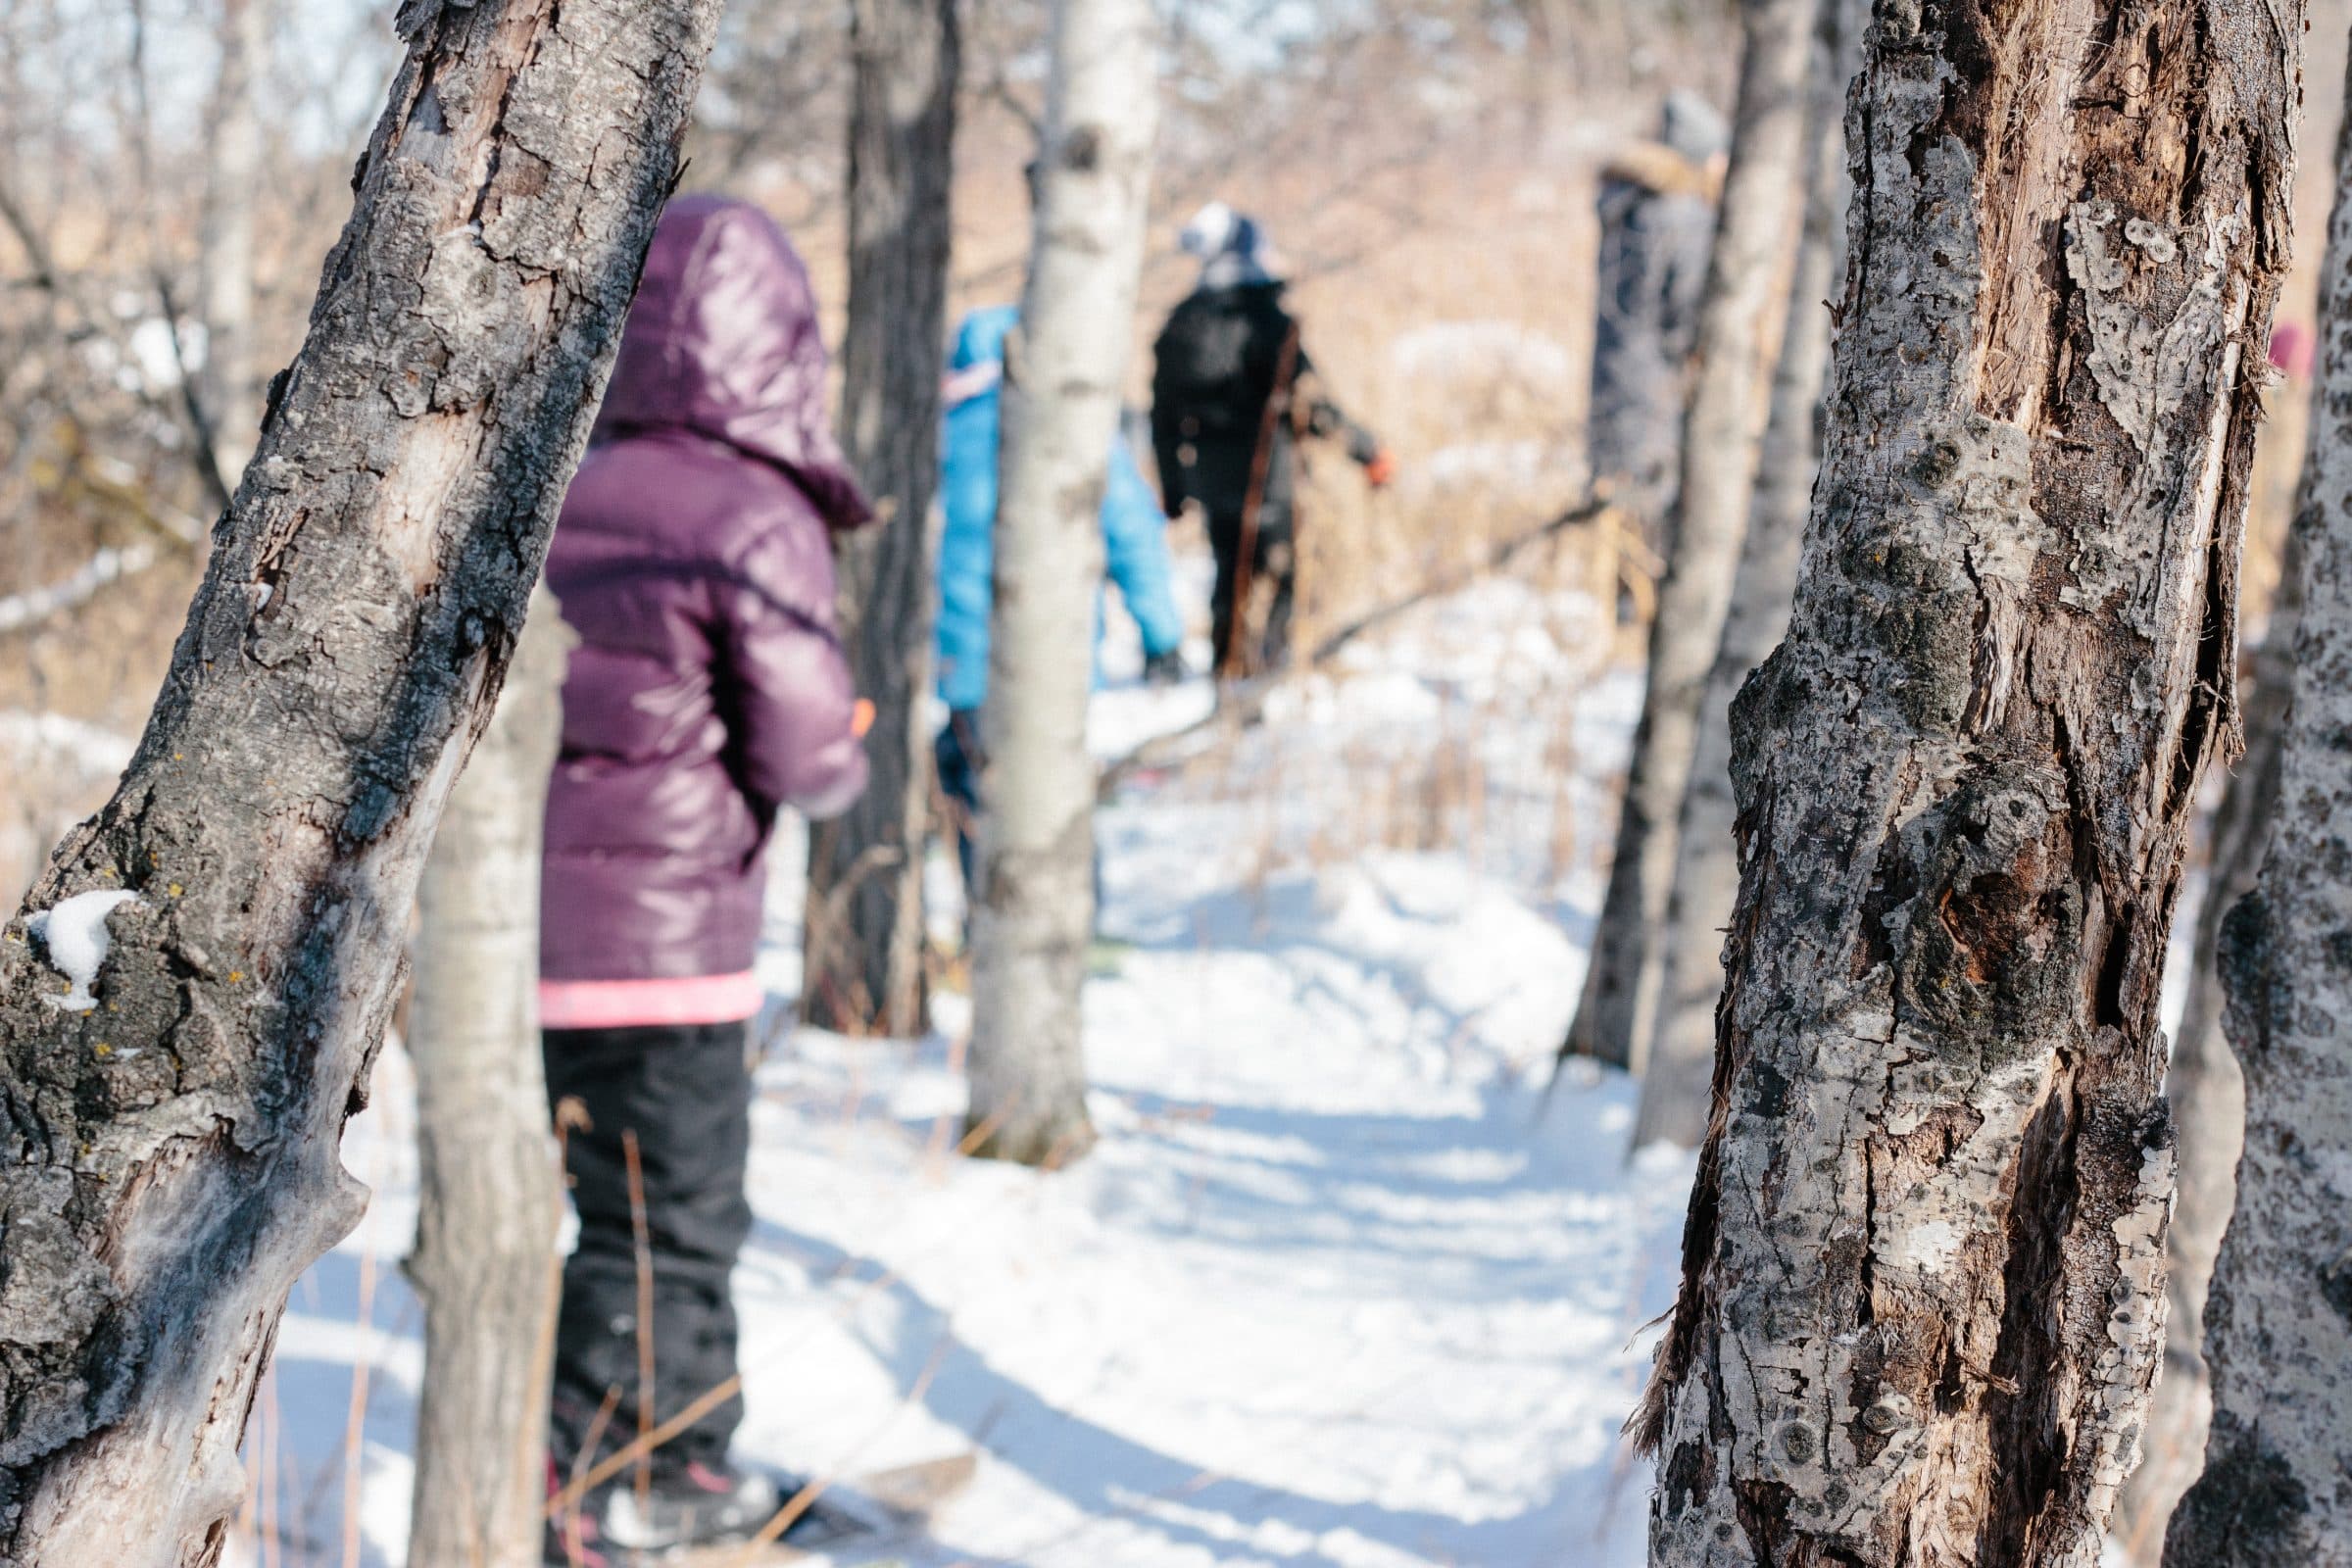 Students walking through trees on snowshoes.